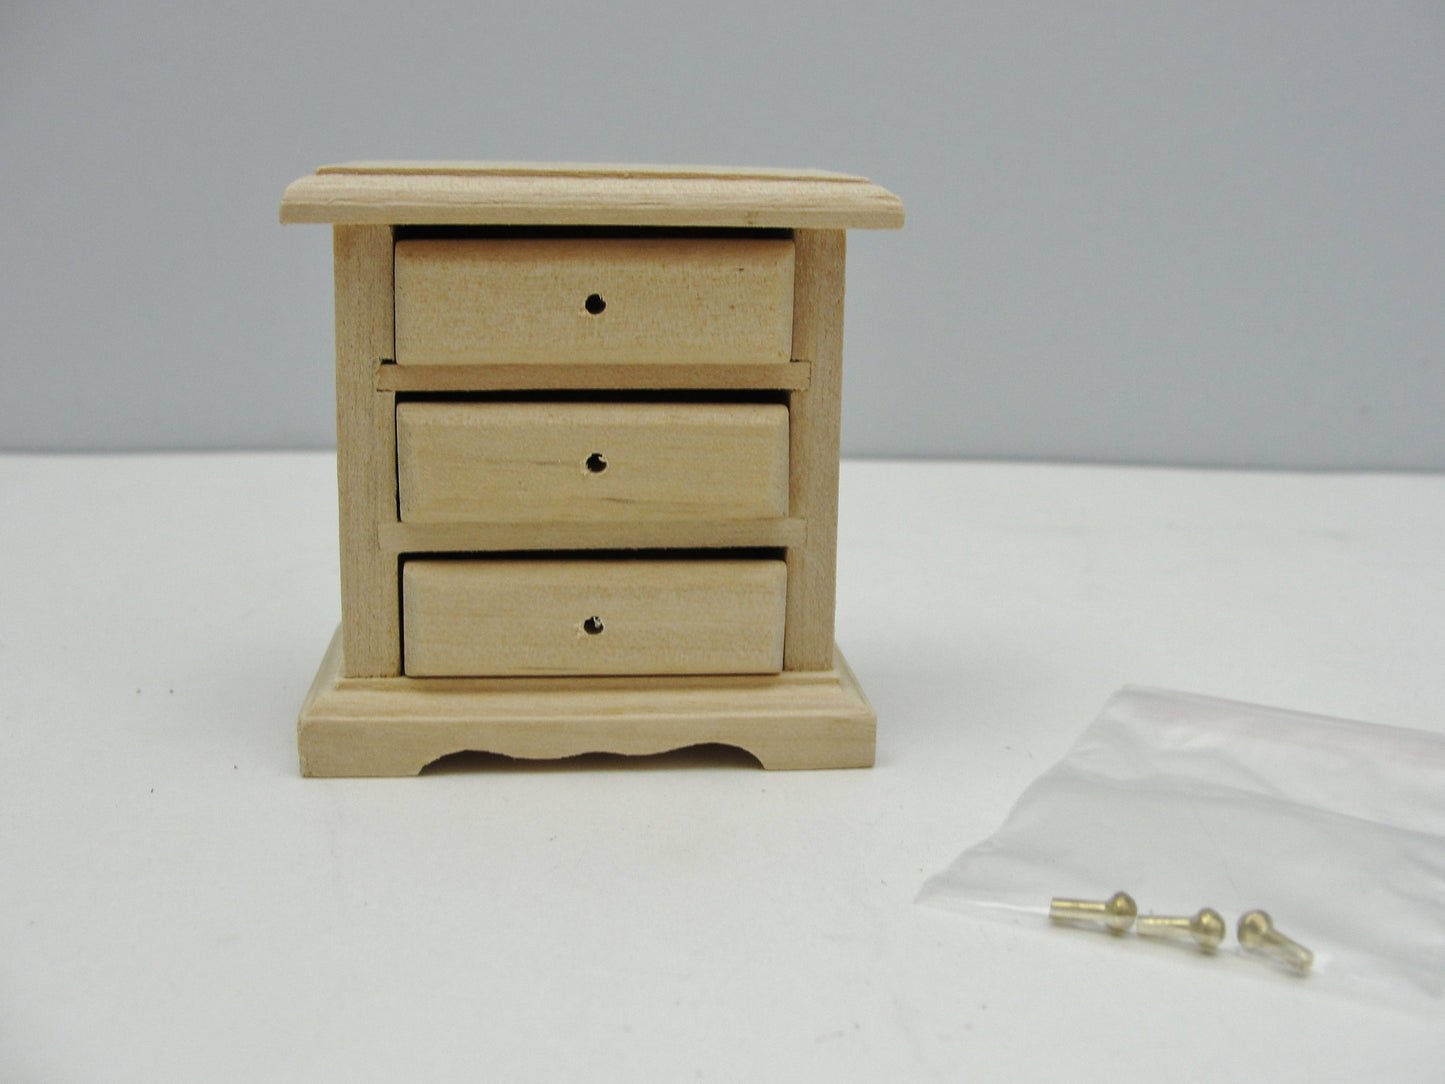 Dollhouse furniture miniature bedside nightstand or side table kit - Miniatures - Craft Supply House